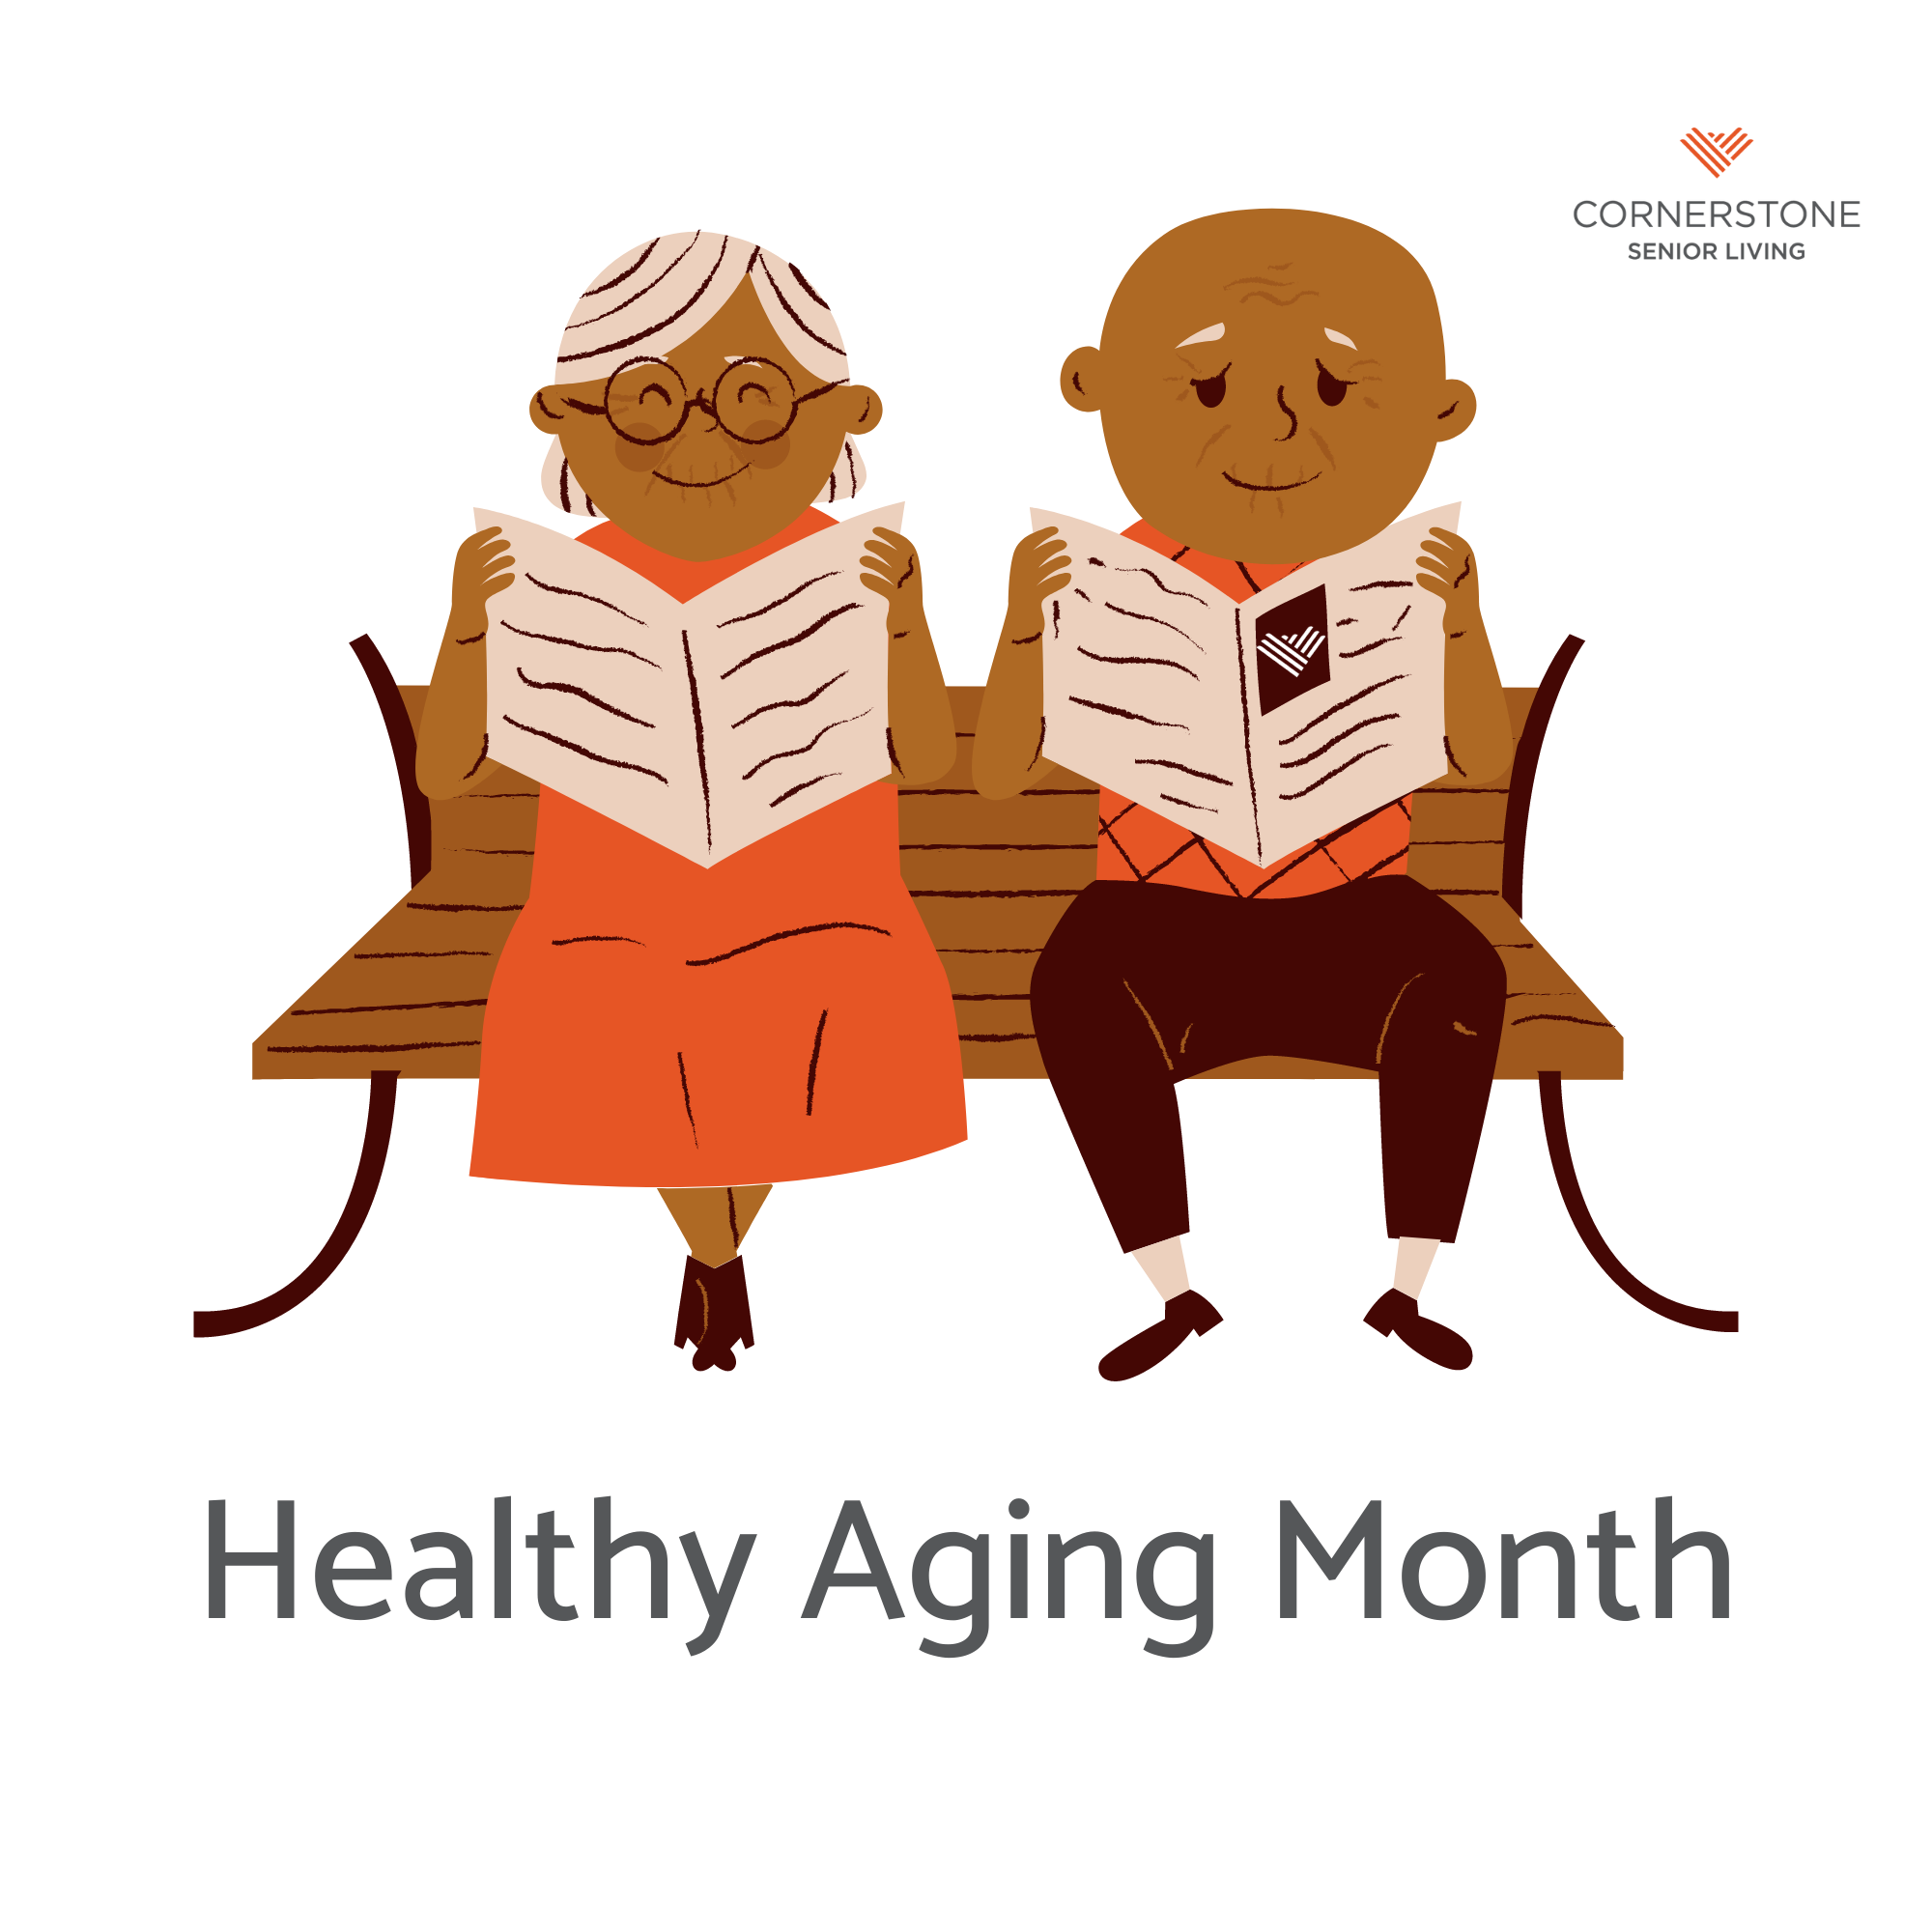 Healthy Aging Month: A Time to Prioritize Your Health